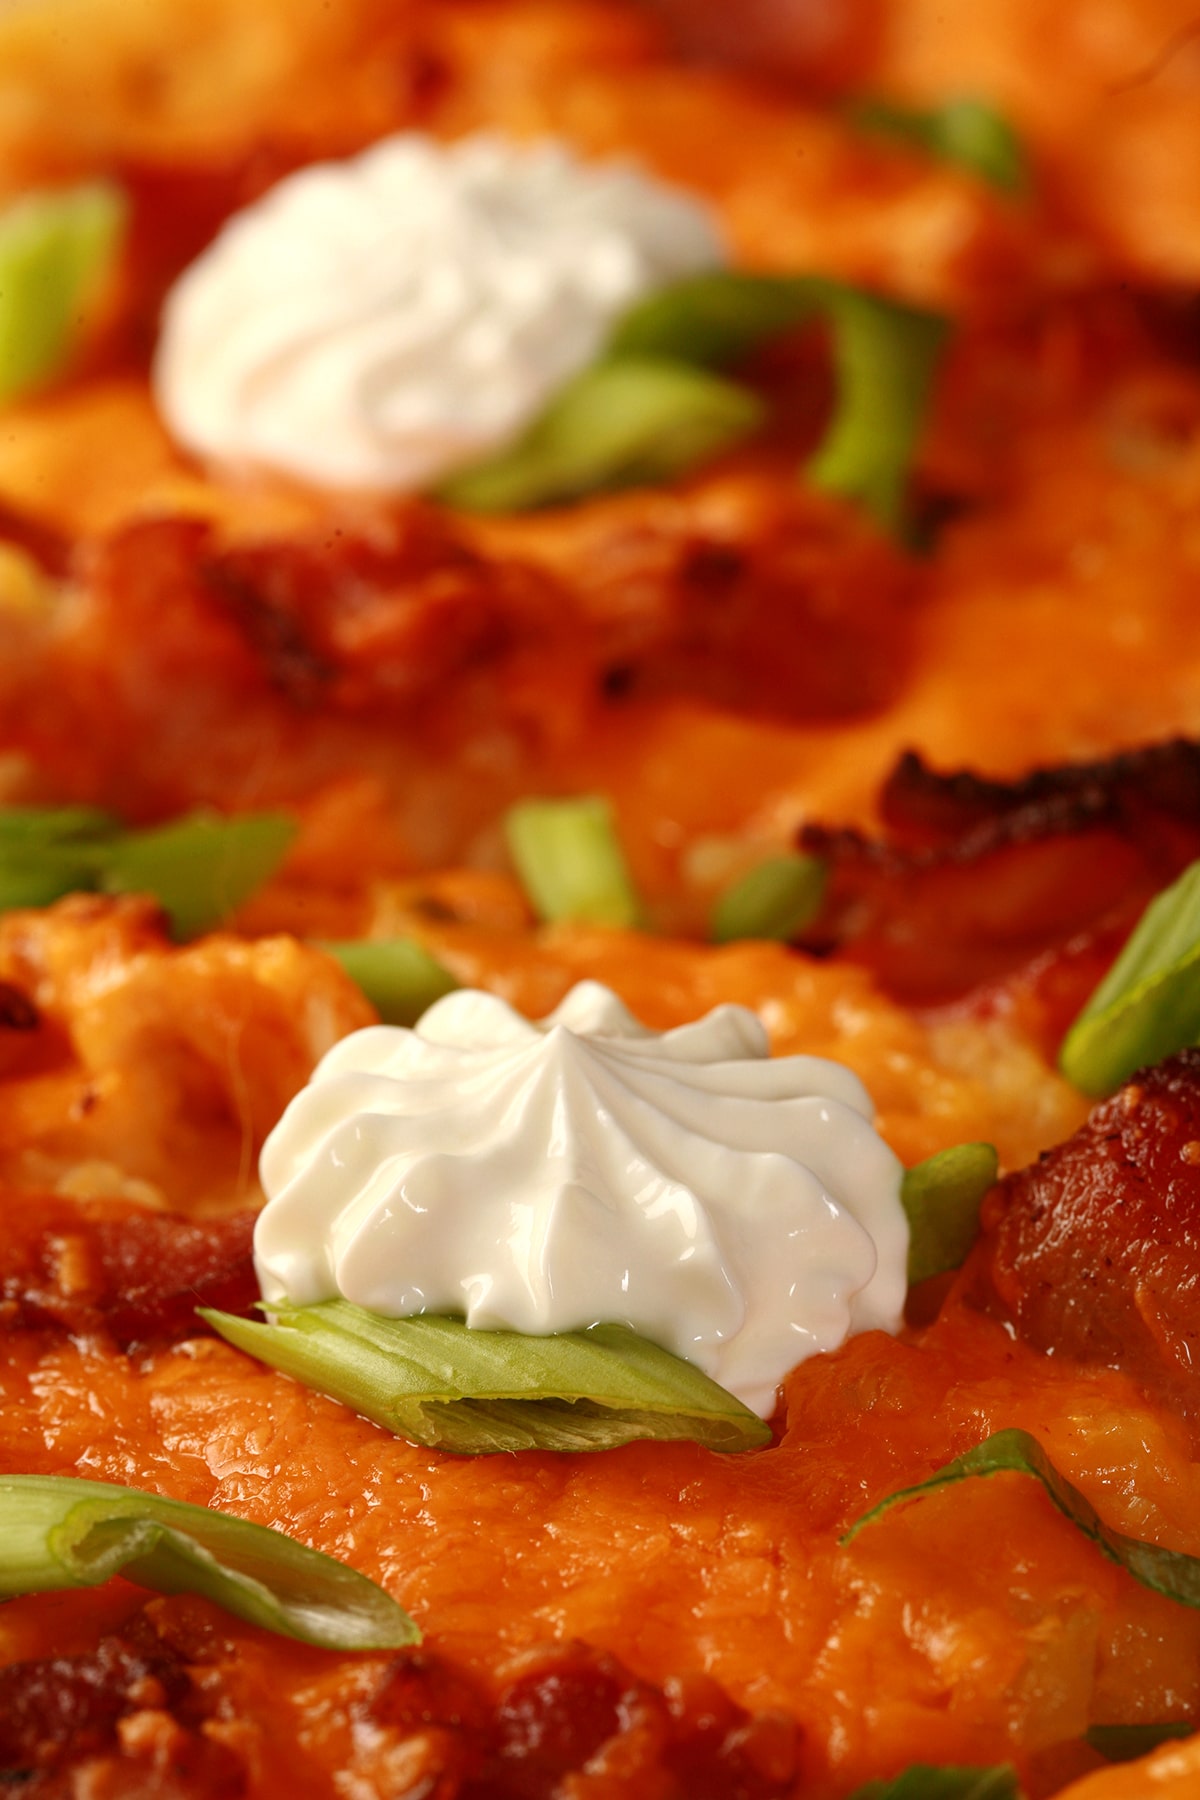 A whole Perogie Pizza - bacon, green onions, cheddar cheese, cheesy potatoes, and sour cream!